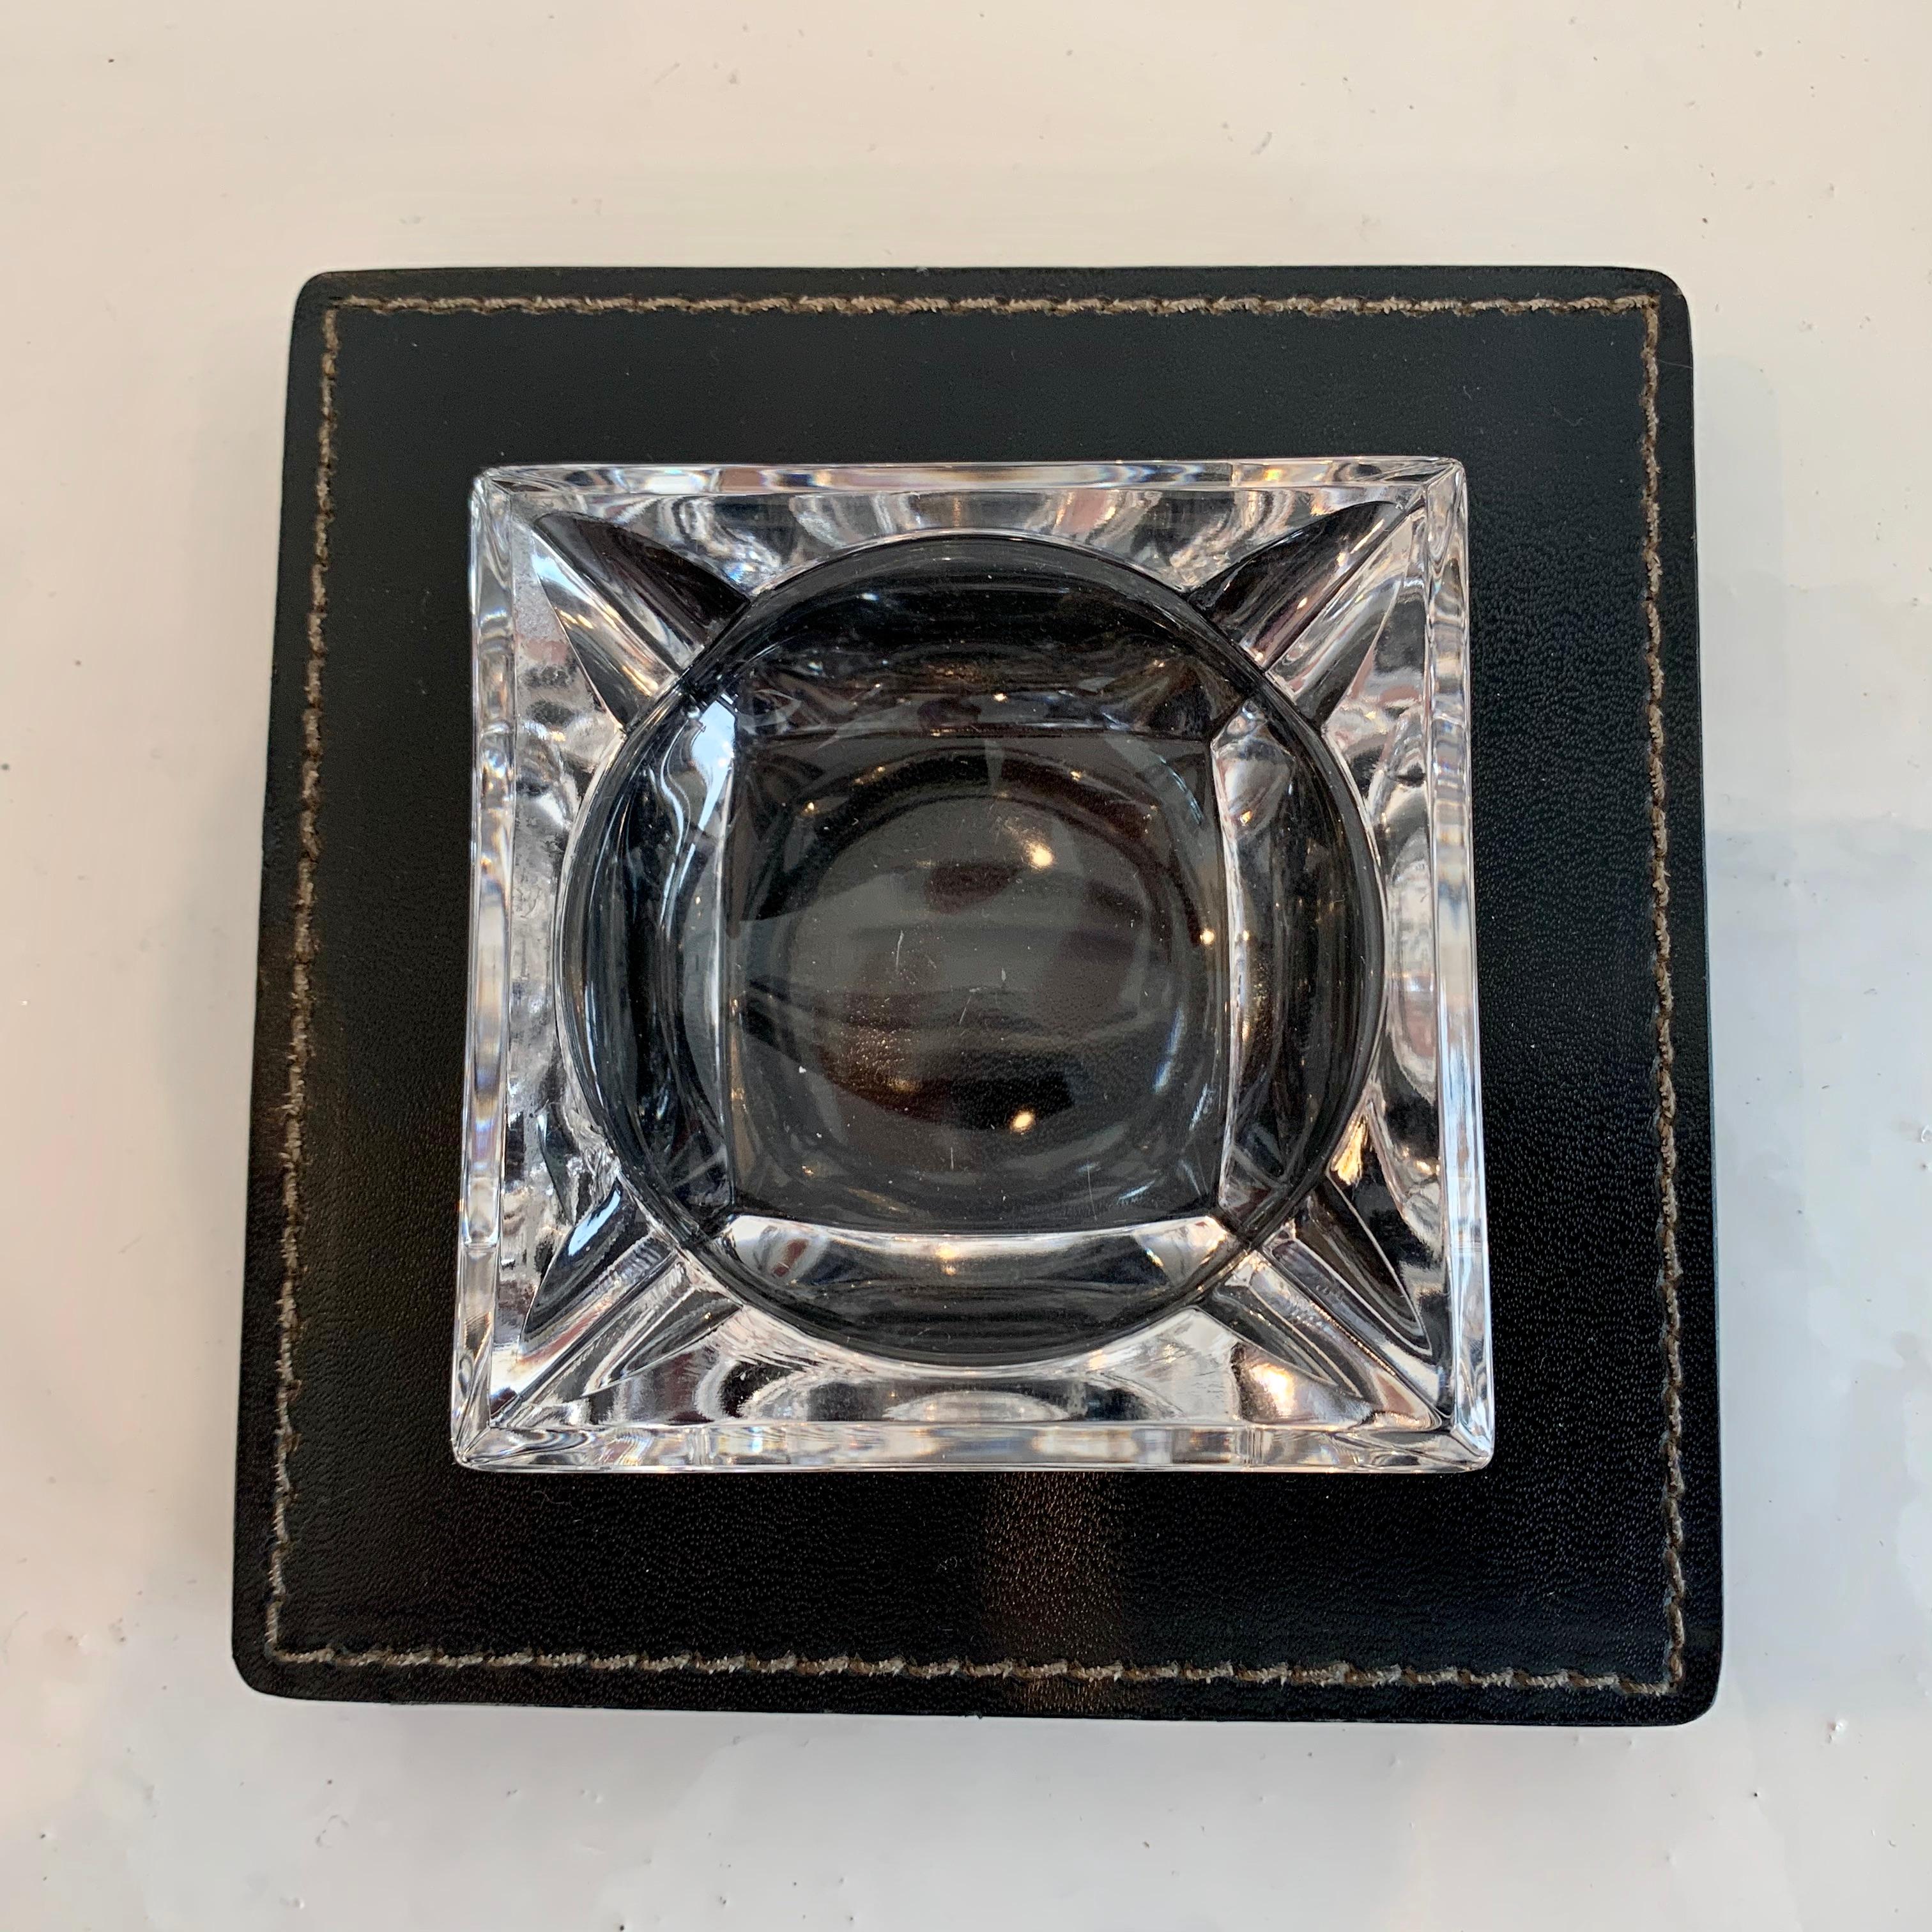 Elegant ashtray in the style of Dupre-Lafon. Black stacked leather base with removable glass dish. Contrast stitching. Classic design, great condition.